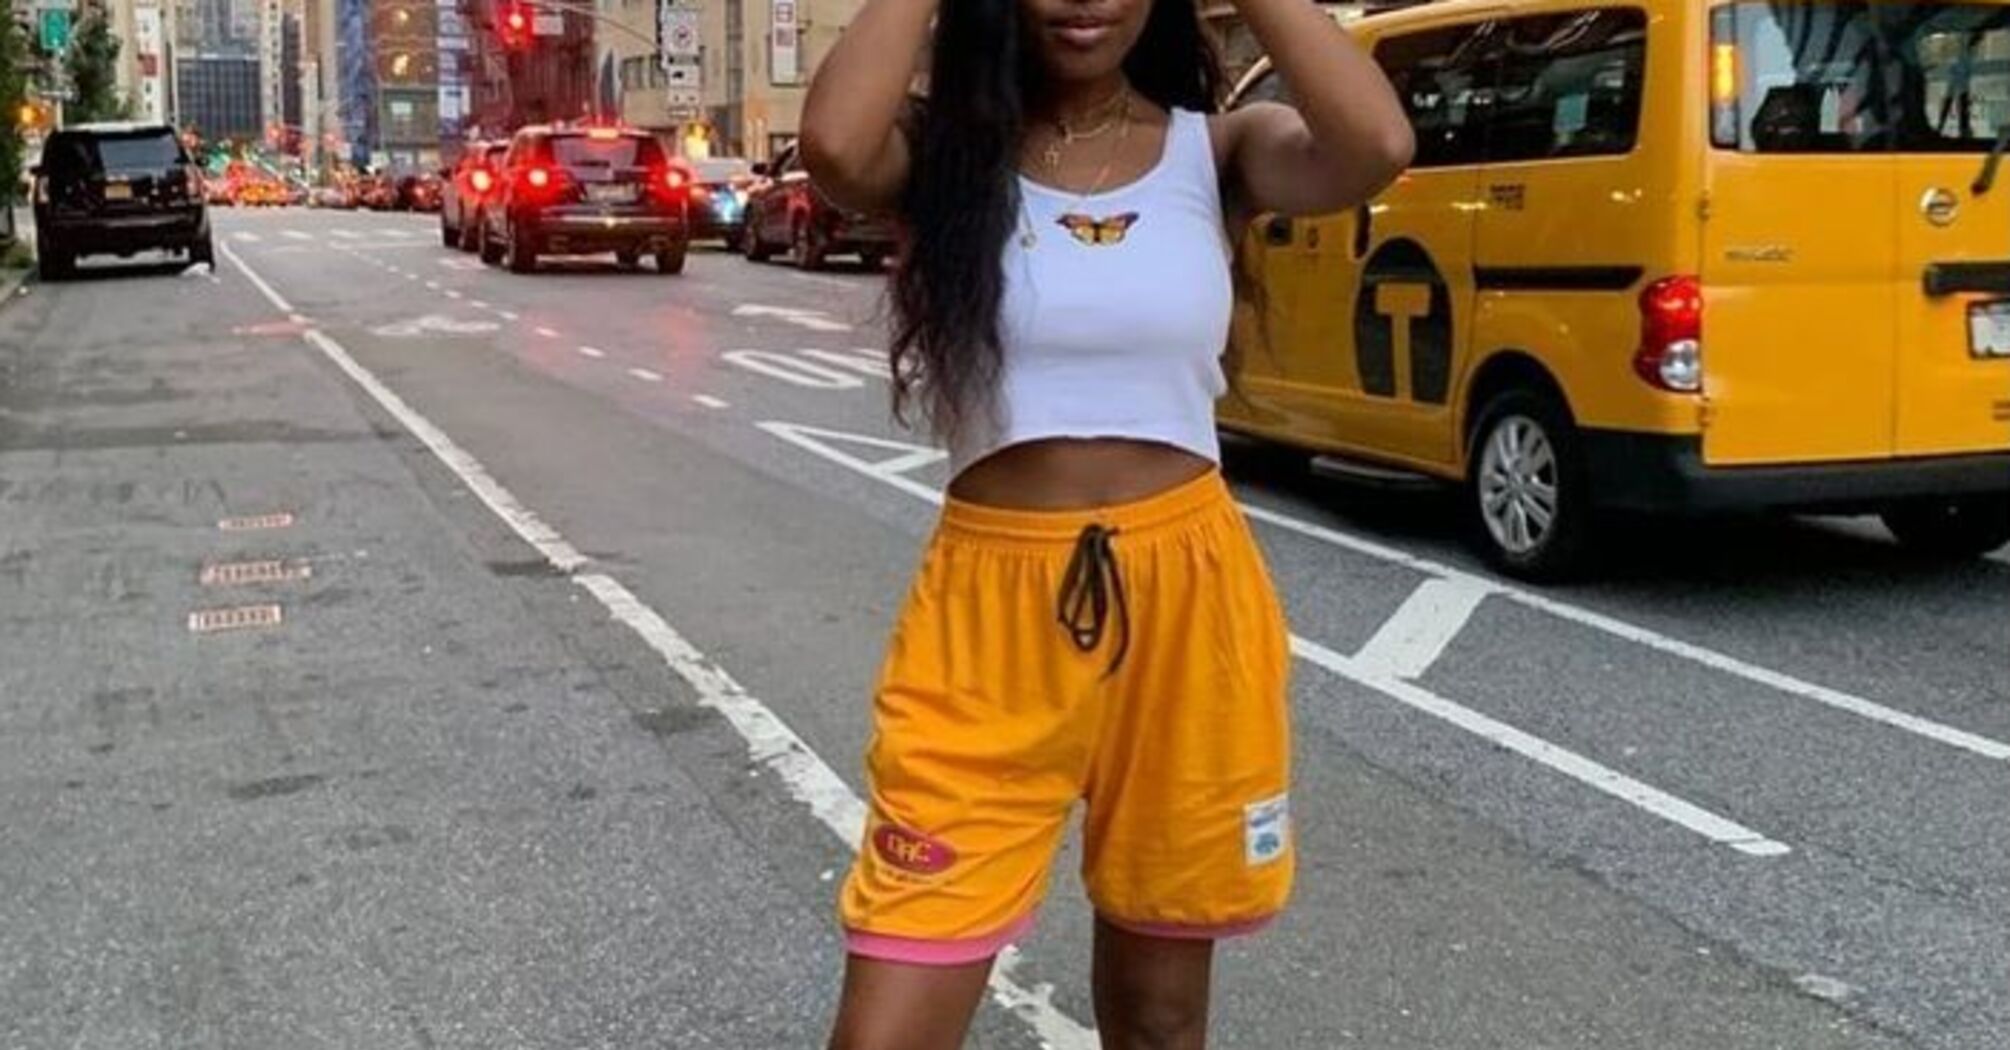 How to style basketball shorts in a bright way